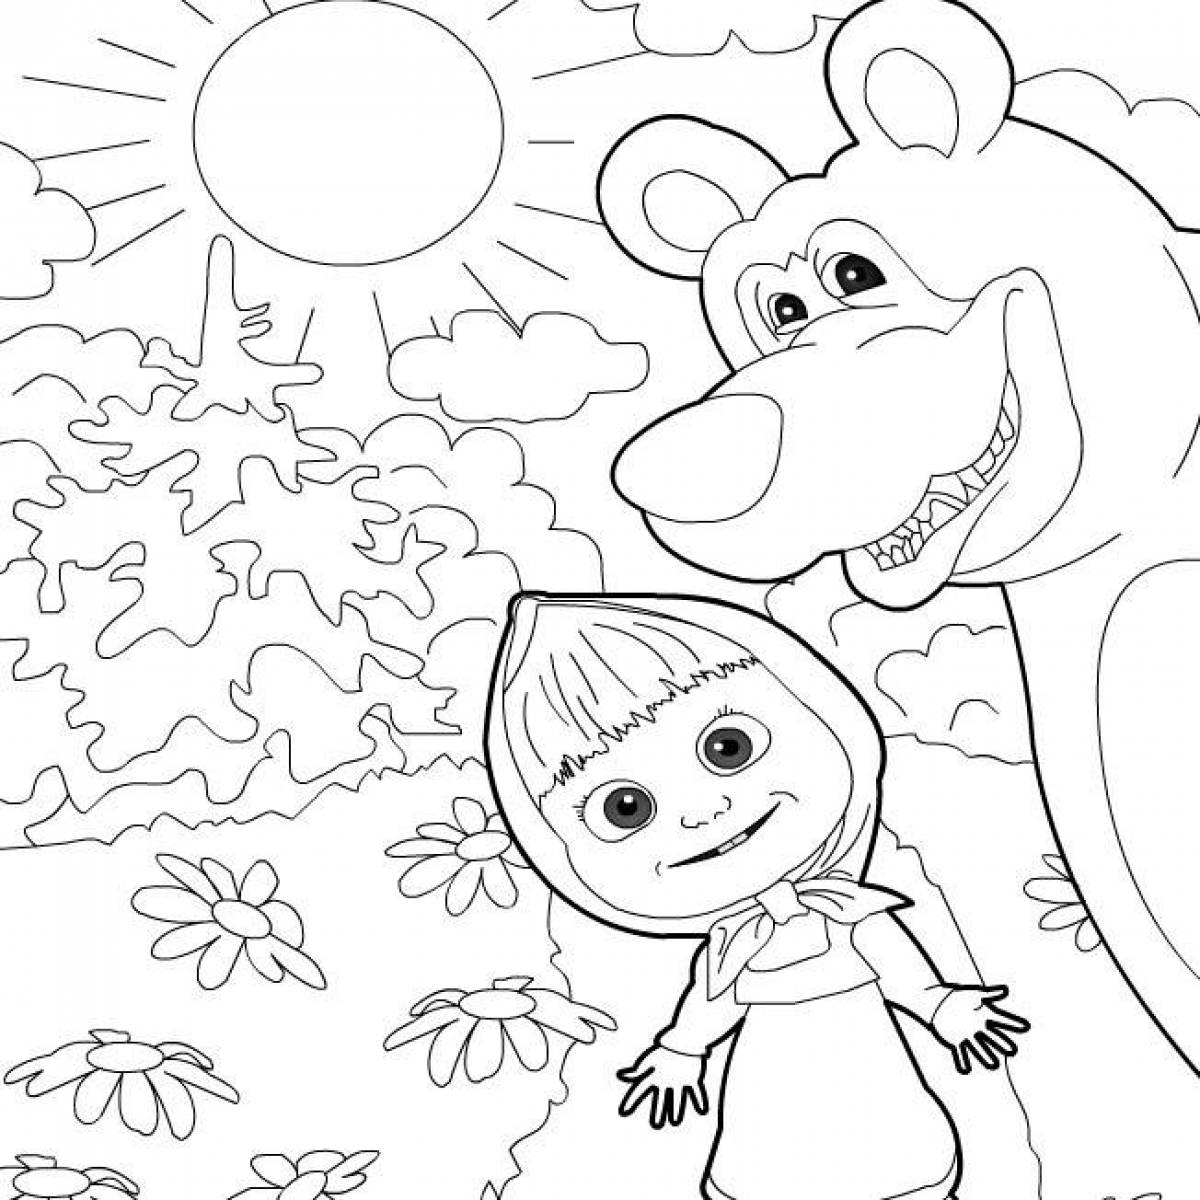 Masha and the bear coloring book for kids